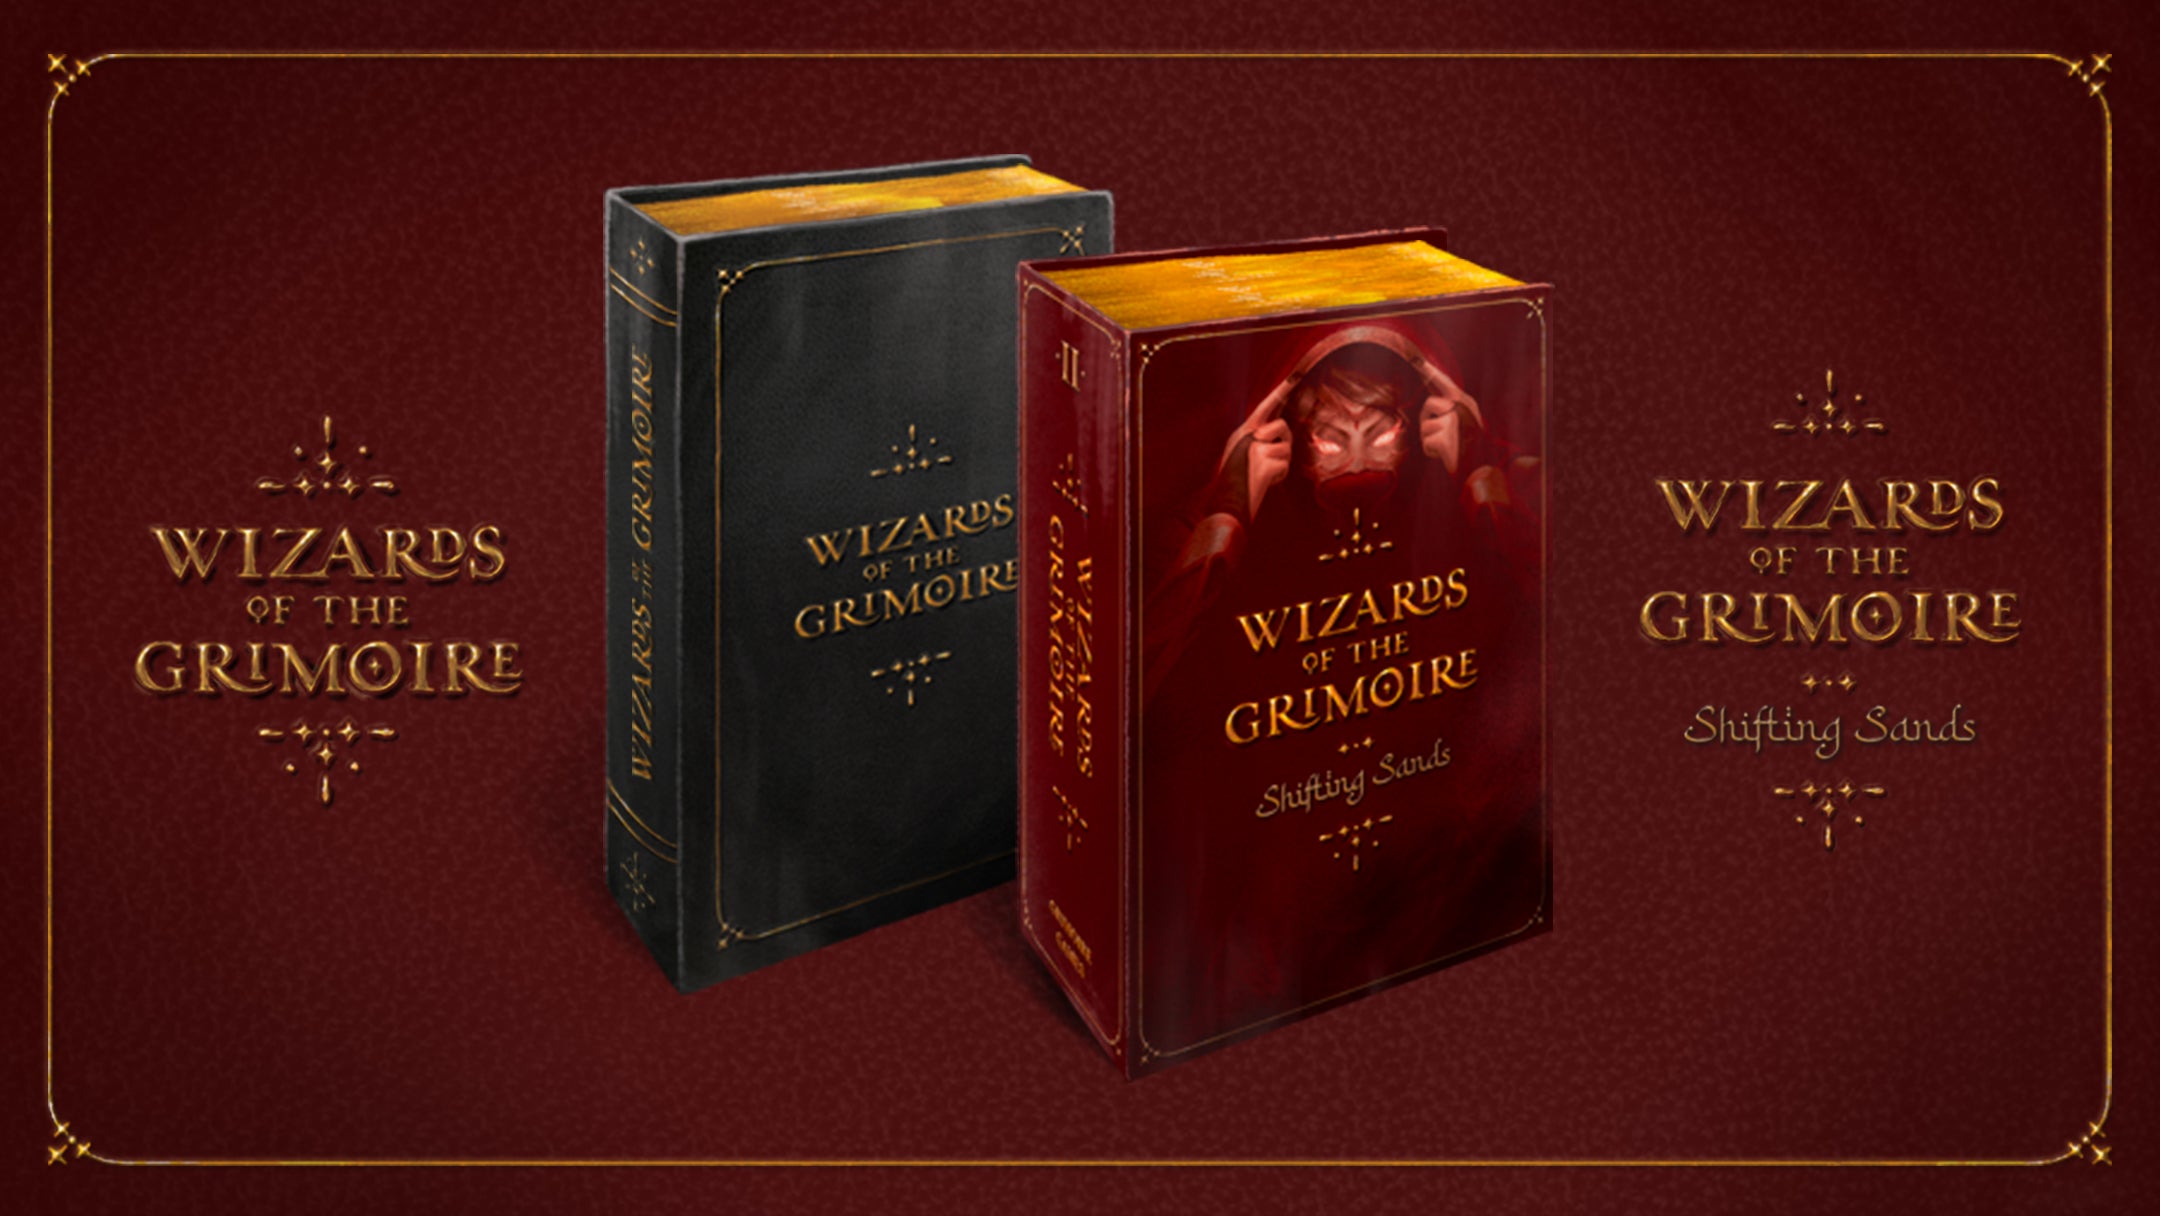 Wizards of the Grimoire: Base Game & Shifting Sands (Pre-order)